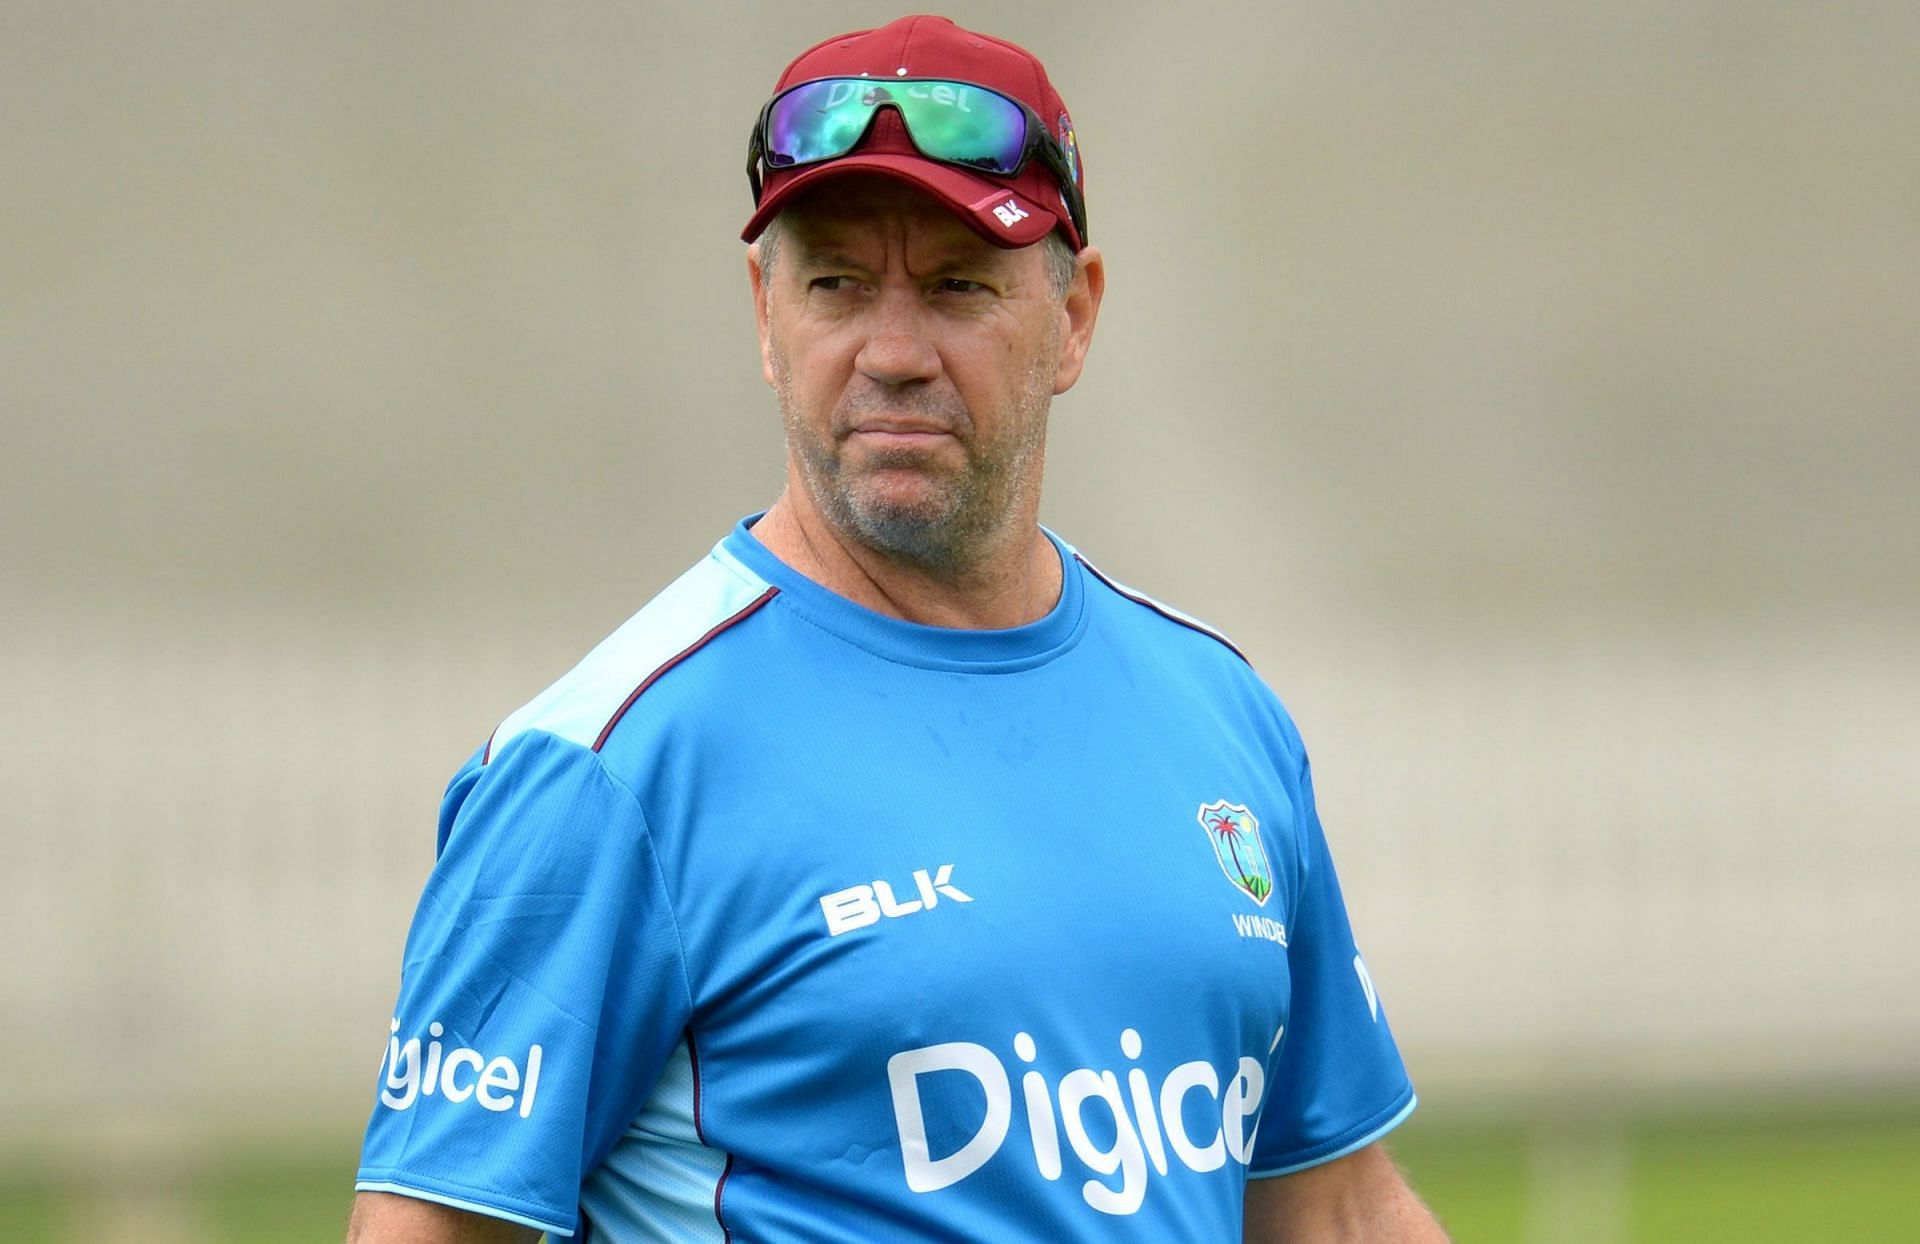 Former Australian cricketer Stuart Law has been appointed as the new head coach of the United States of America (USA) Men